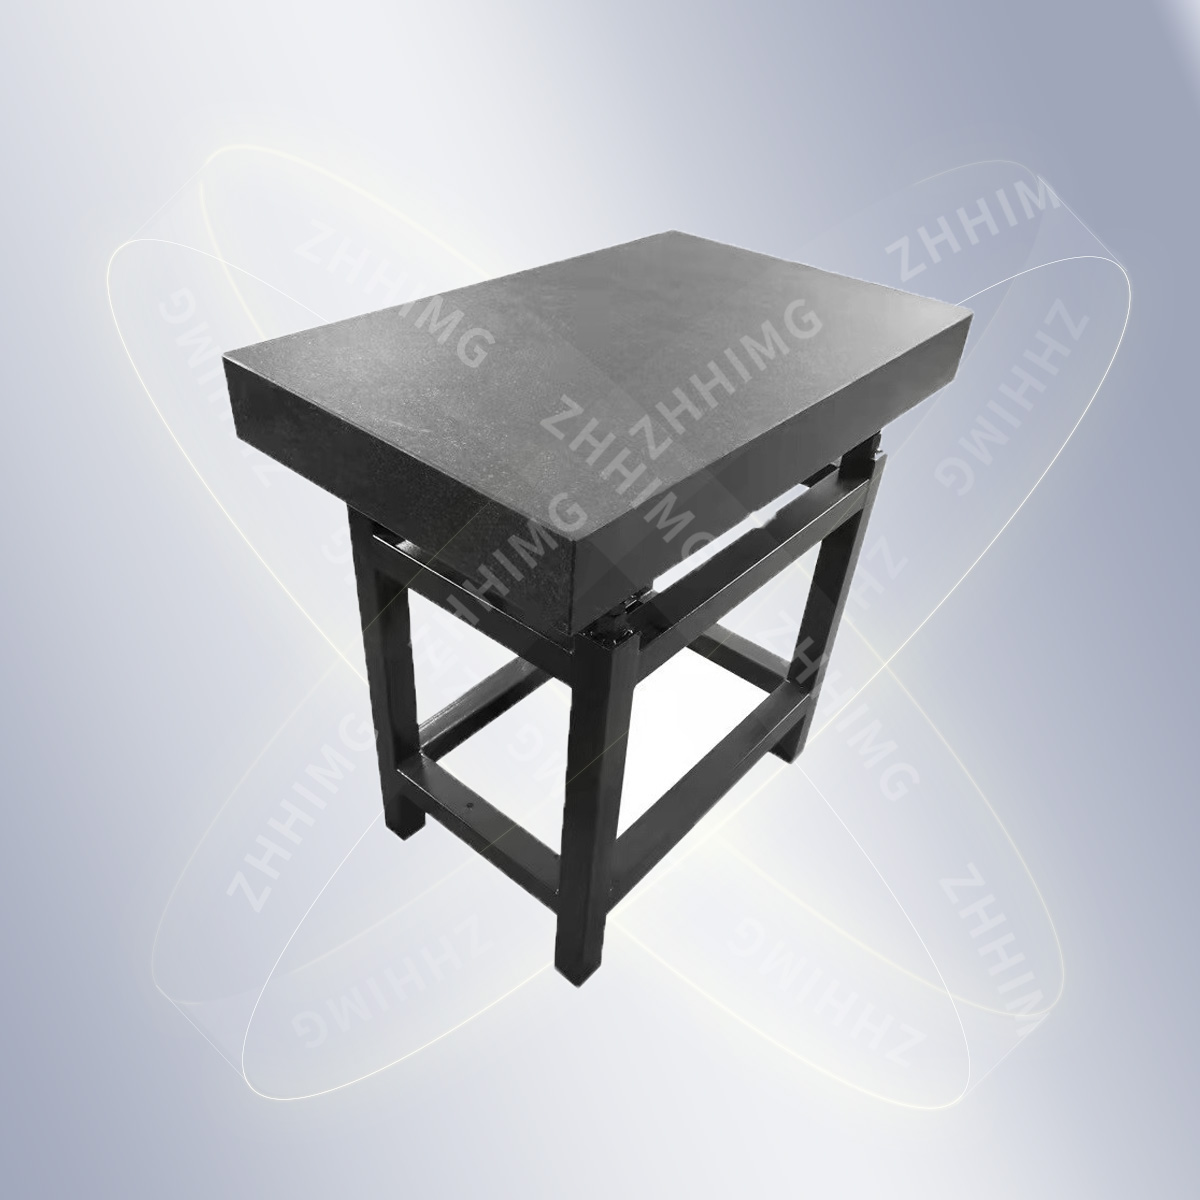 2021 High quality Granite Base For Dial Gauge - Granite Inspection Surface Plates & Tables – ZHONGHUI